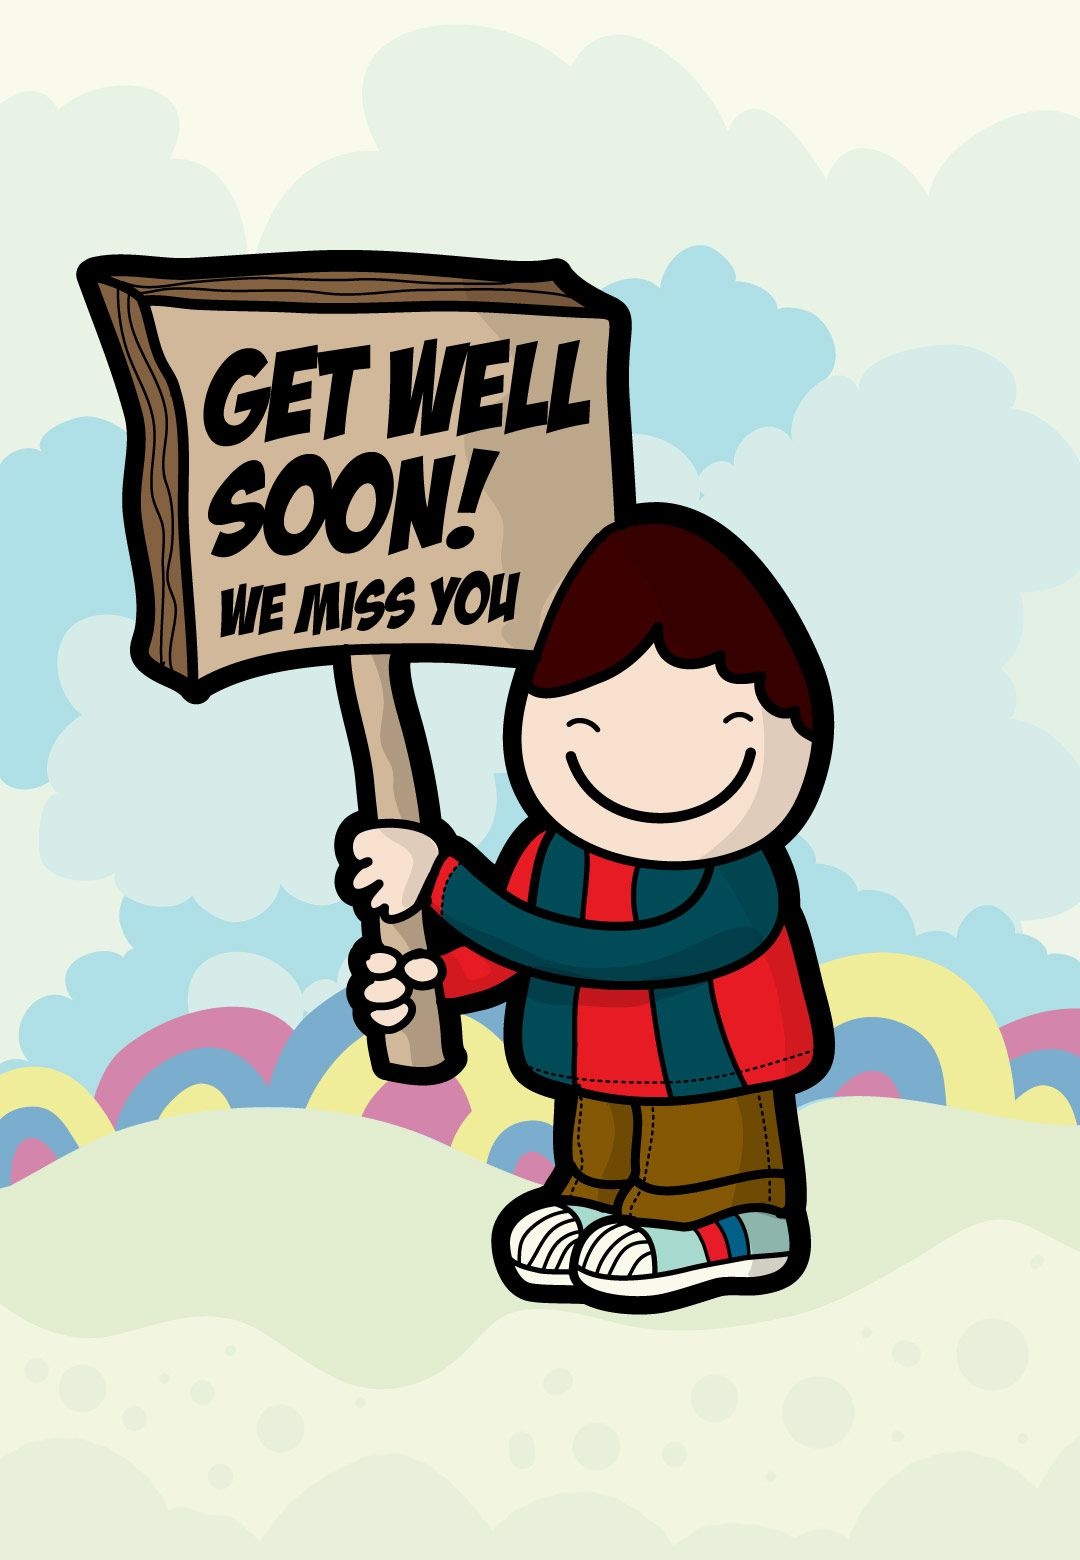 Get Well #card Free Printable We Miss You Greeting Card | Get Well - Free Printable We Will Miss You Greeting Cards